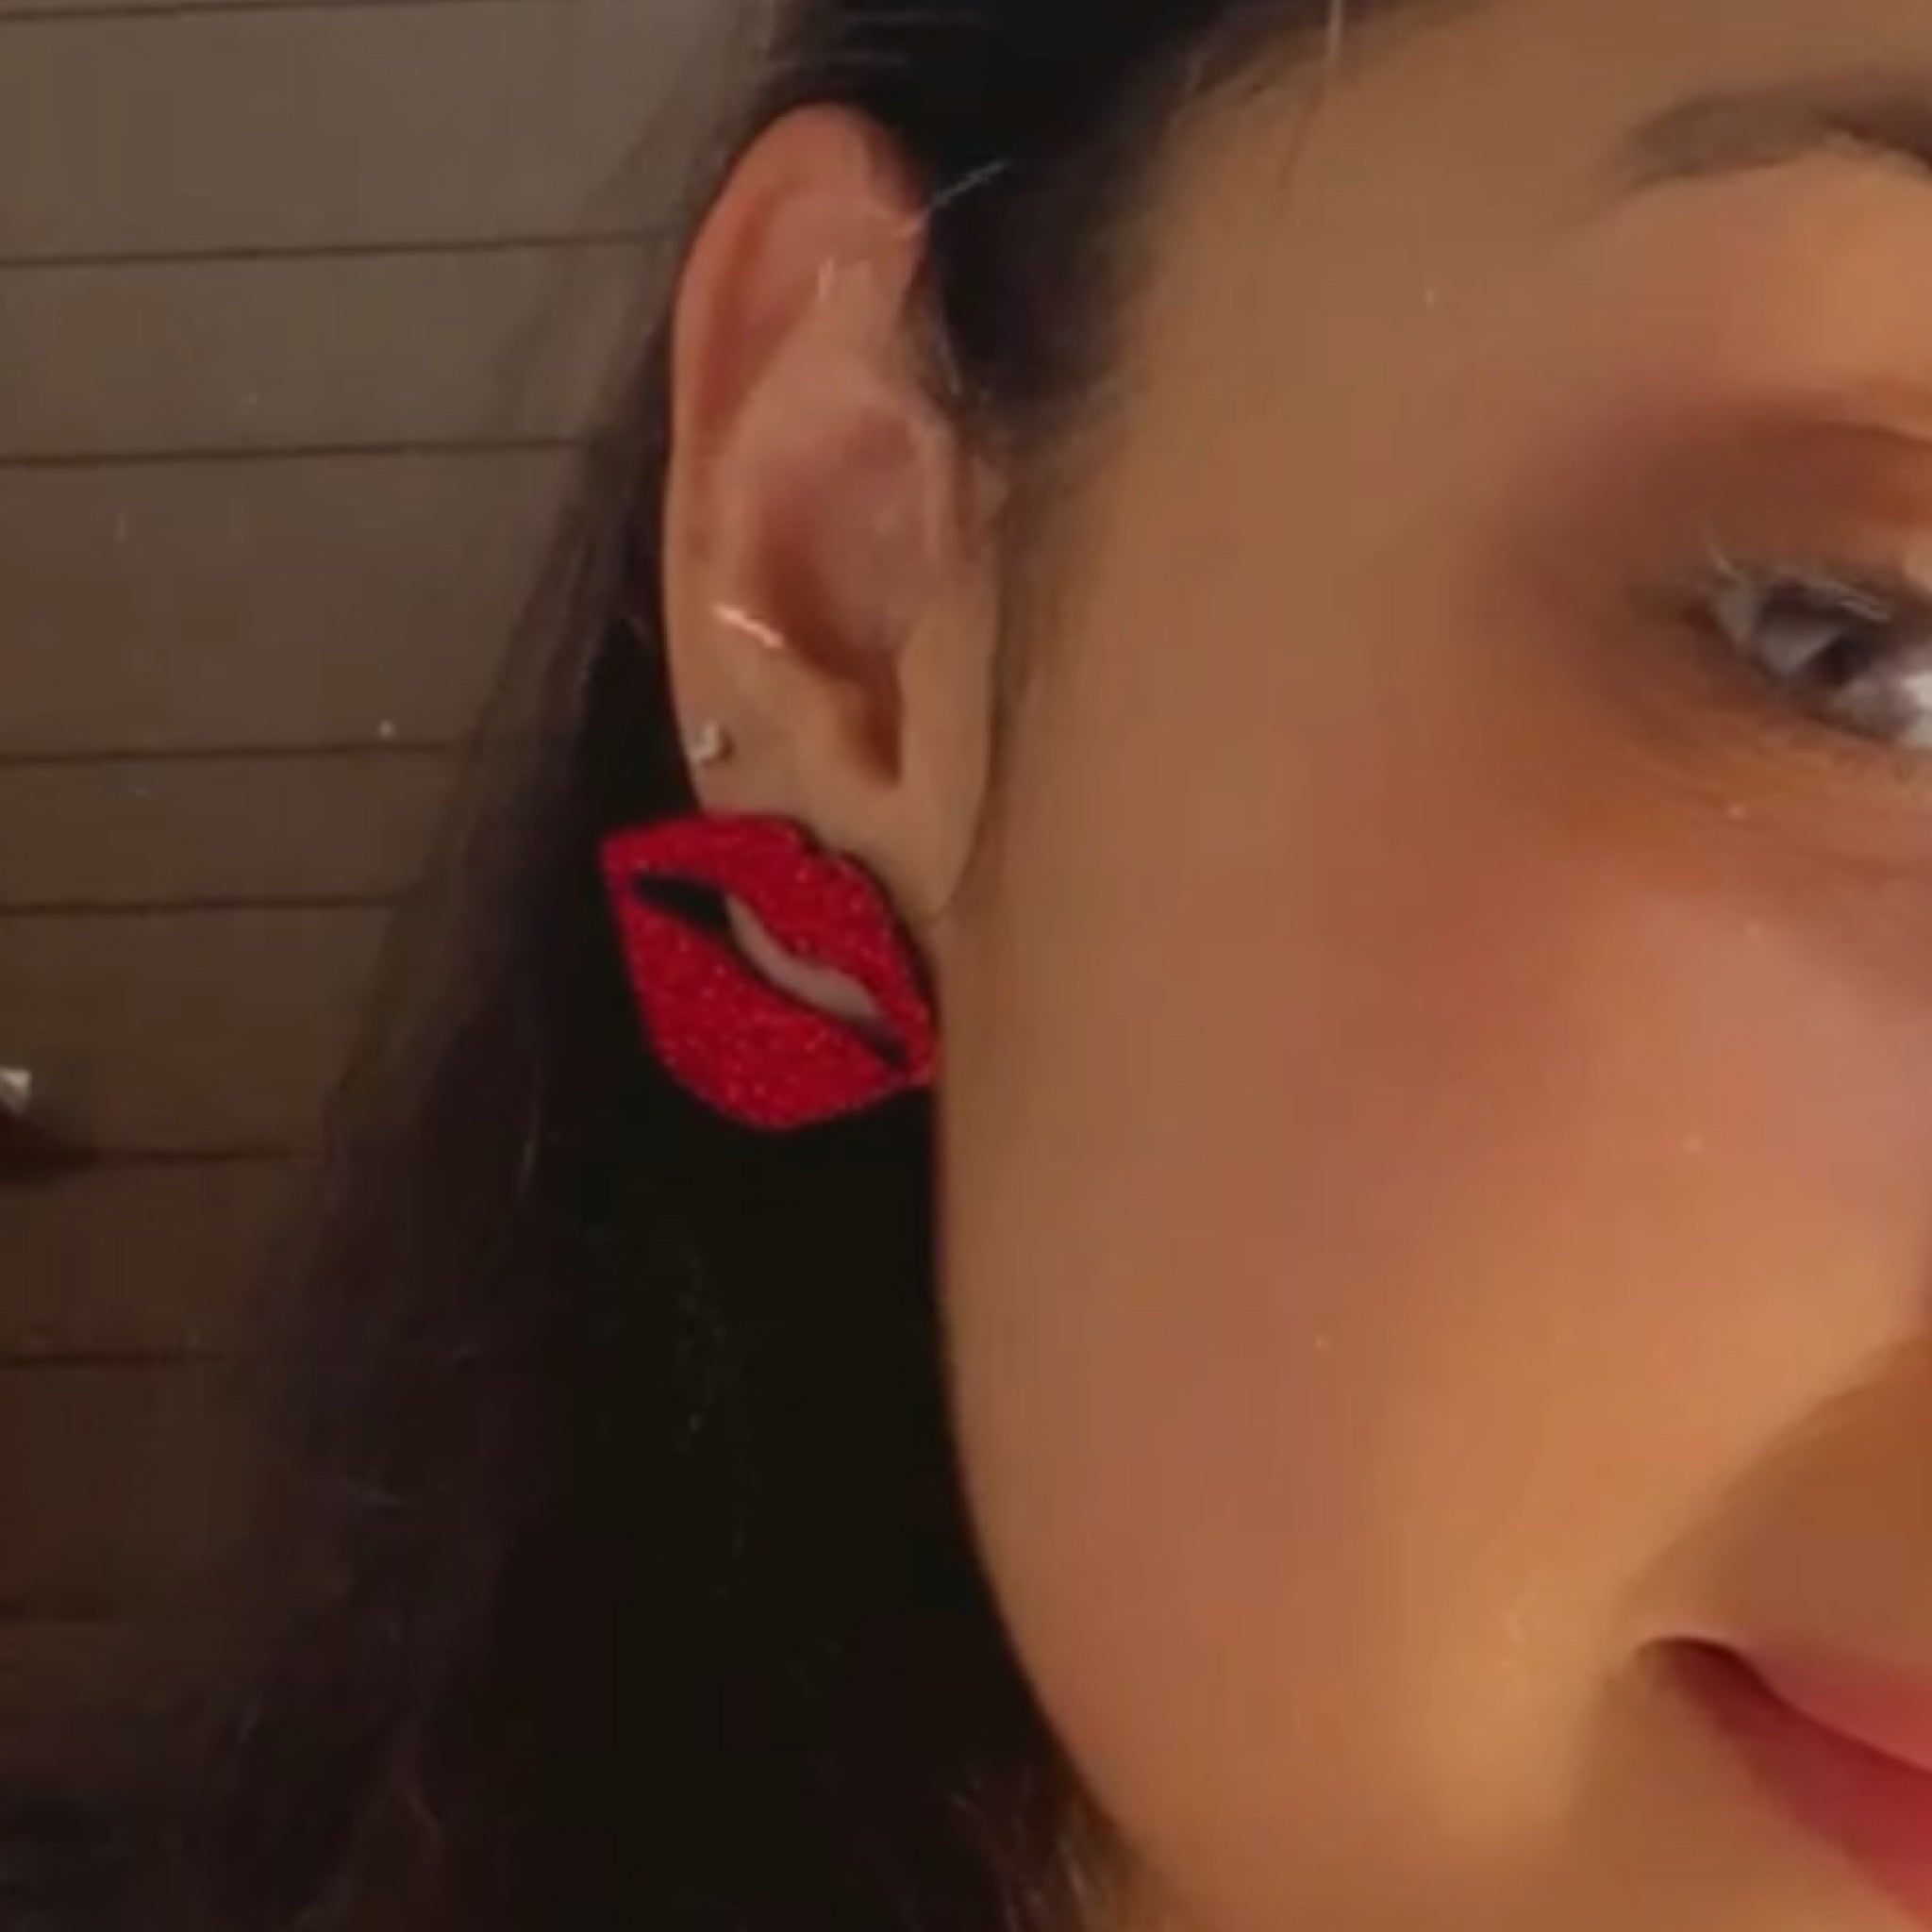 Shimmer Lips Studs - Red - Nian by Nidhi - worn by a woman